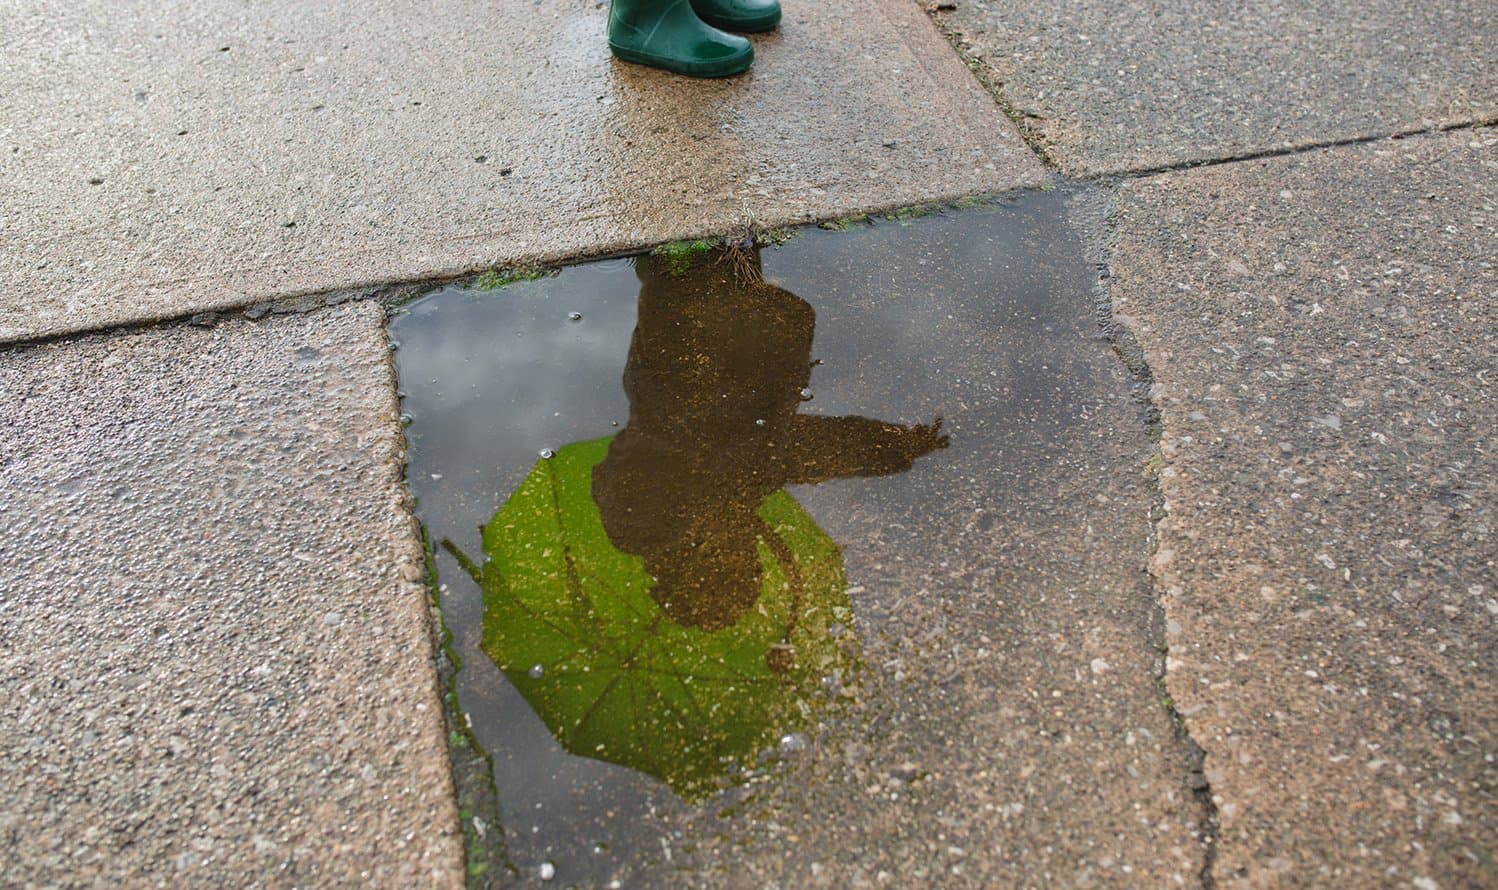 A child's reflection in a puddle.